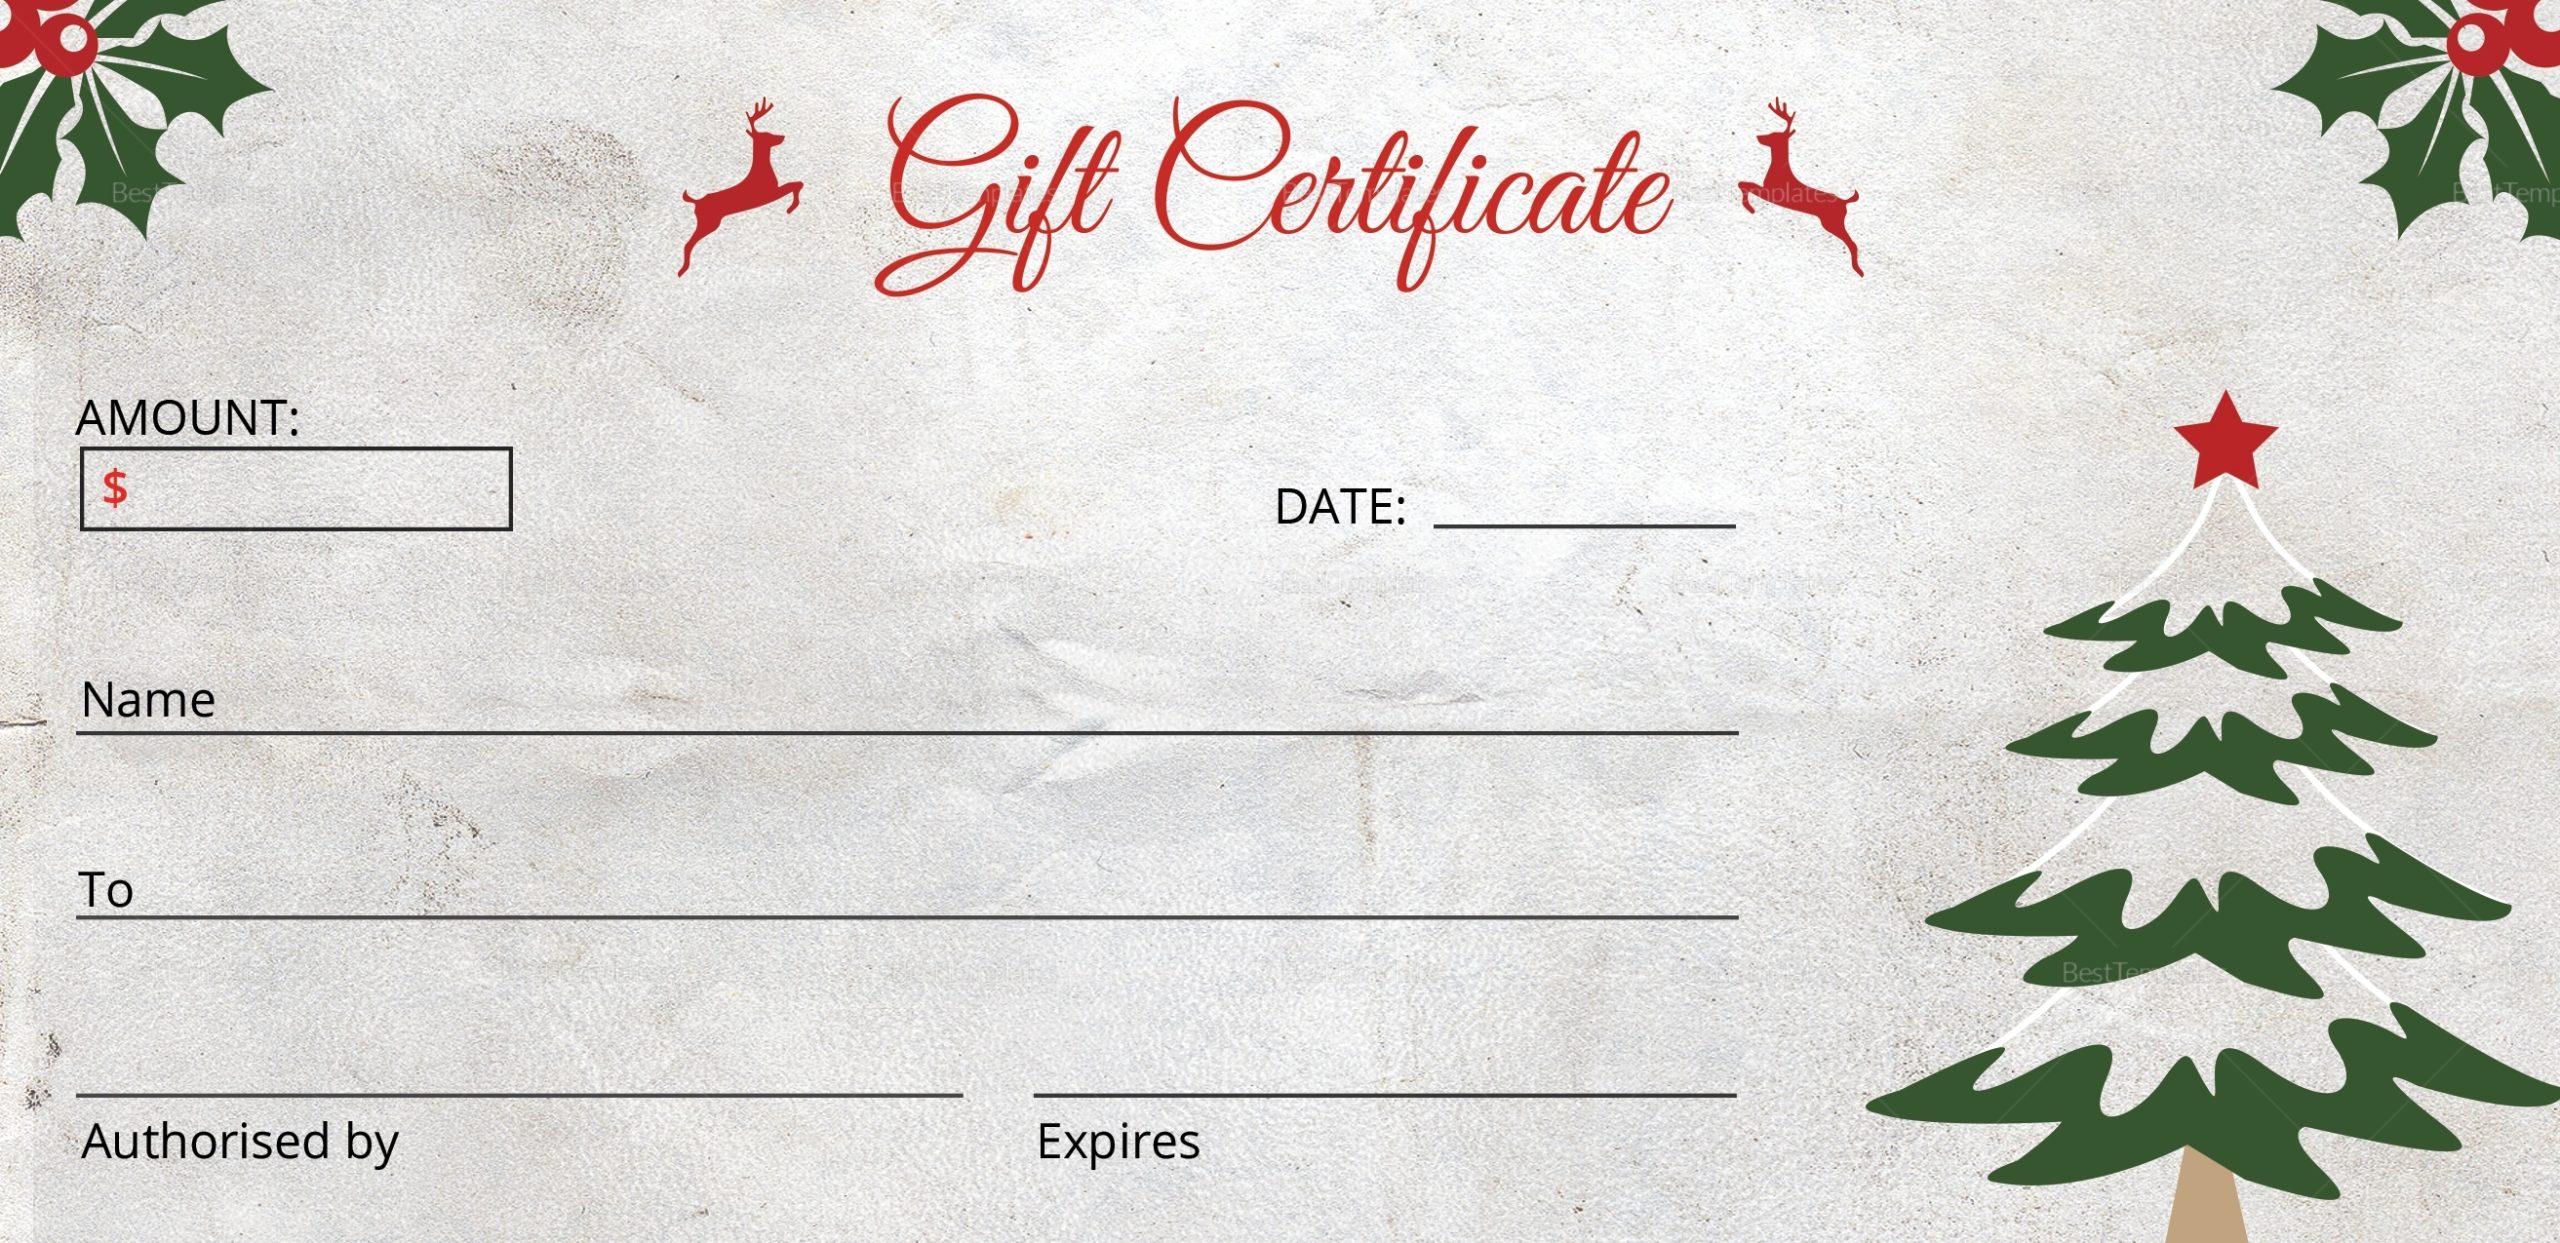 Christmas Tree Gift Certificate Template In Adobe Photoshop Throughout Free Christmas Gift Certificate Templates